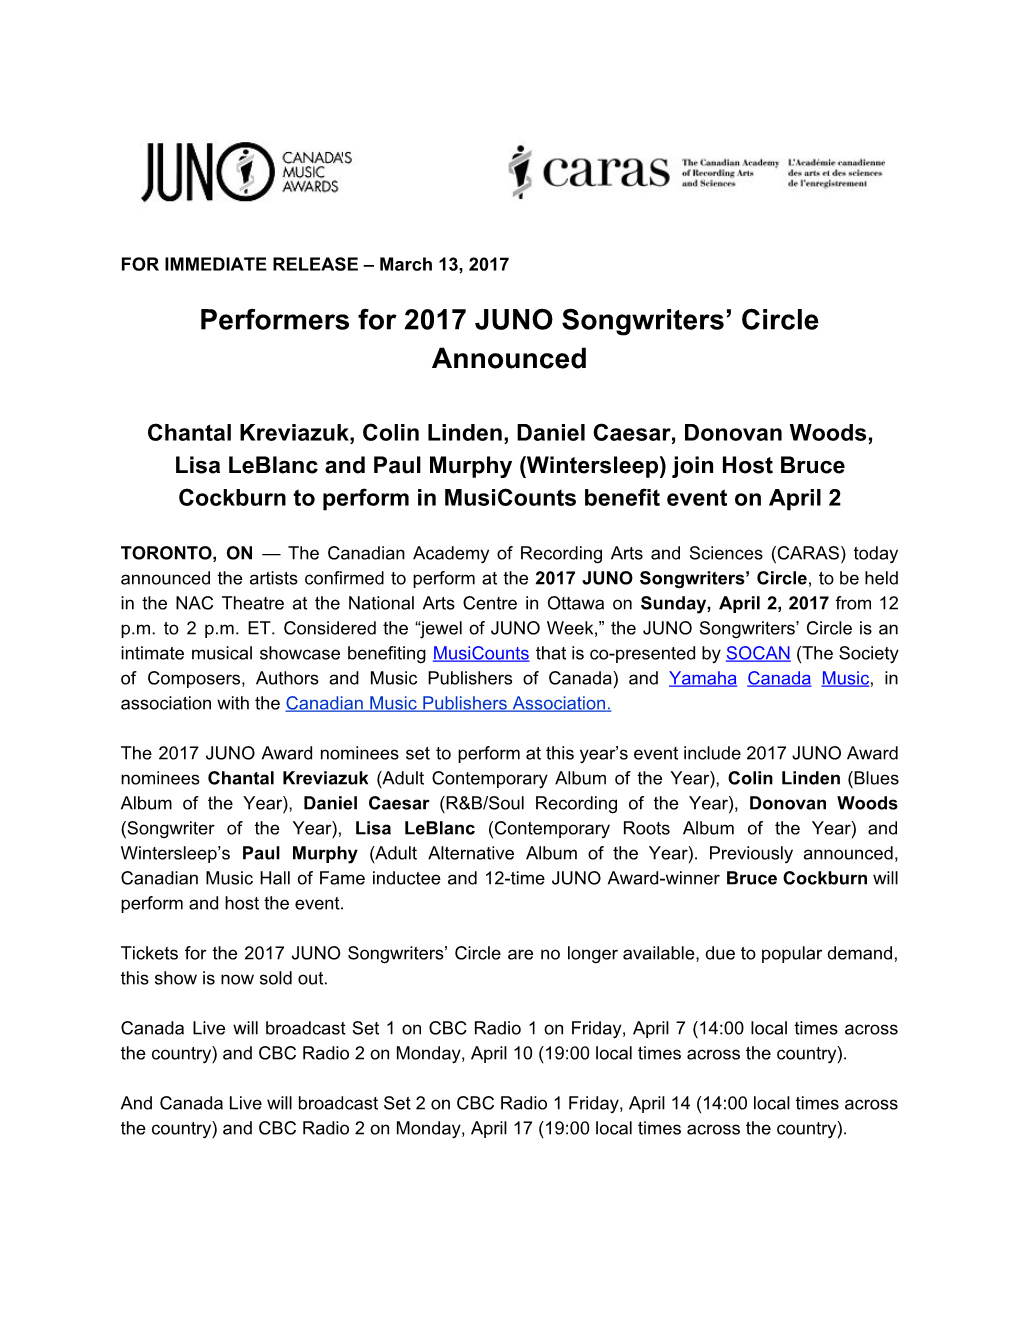 Performers for 2017 JUNO Songwriters' Circle Announced